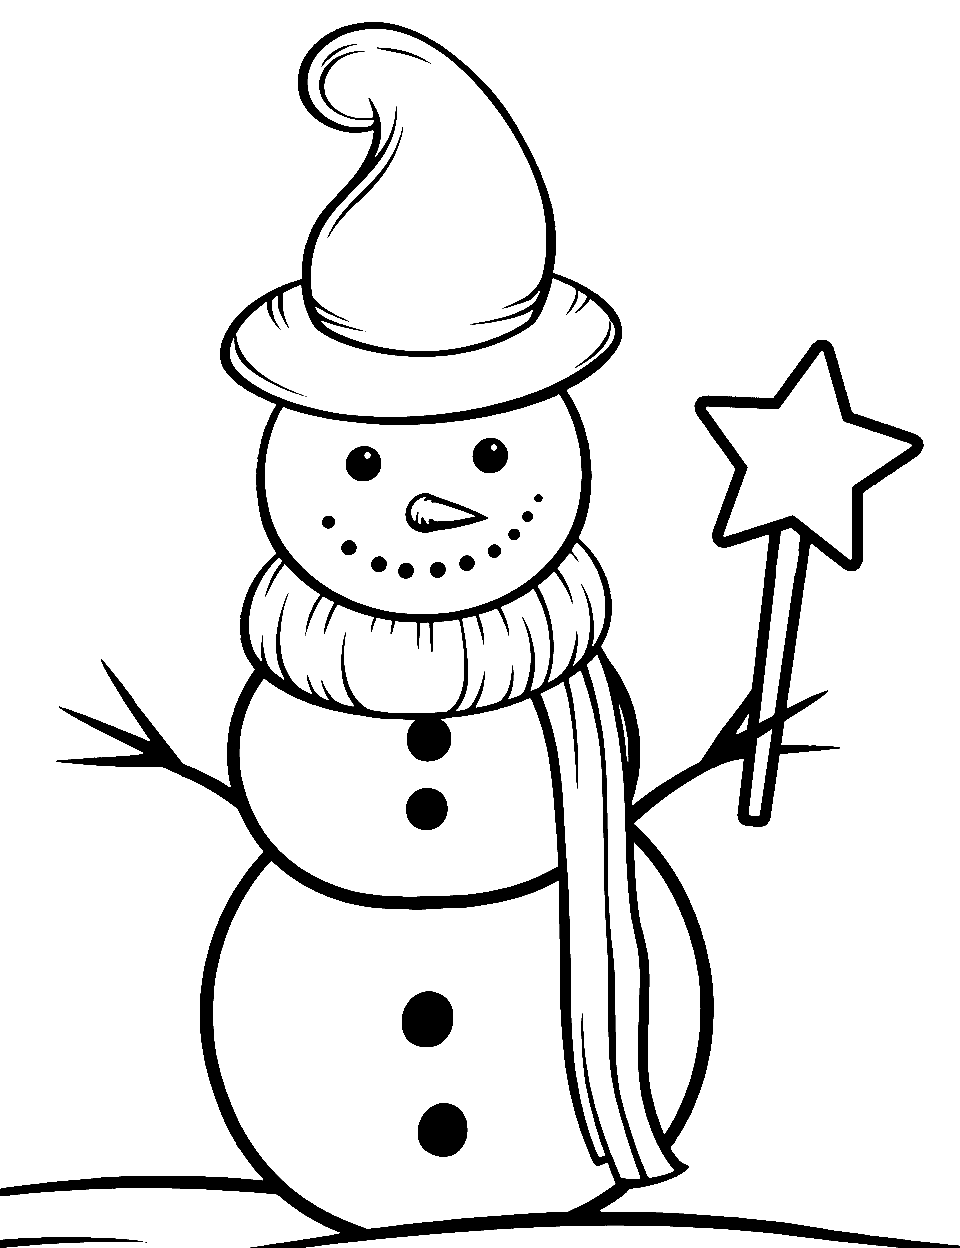 Magical Snowman with a Wand Coloring Page - A snowman wearing a wizard hat and holding a magic wand.